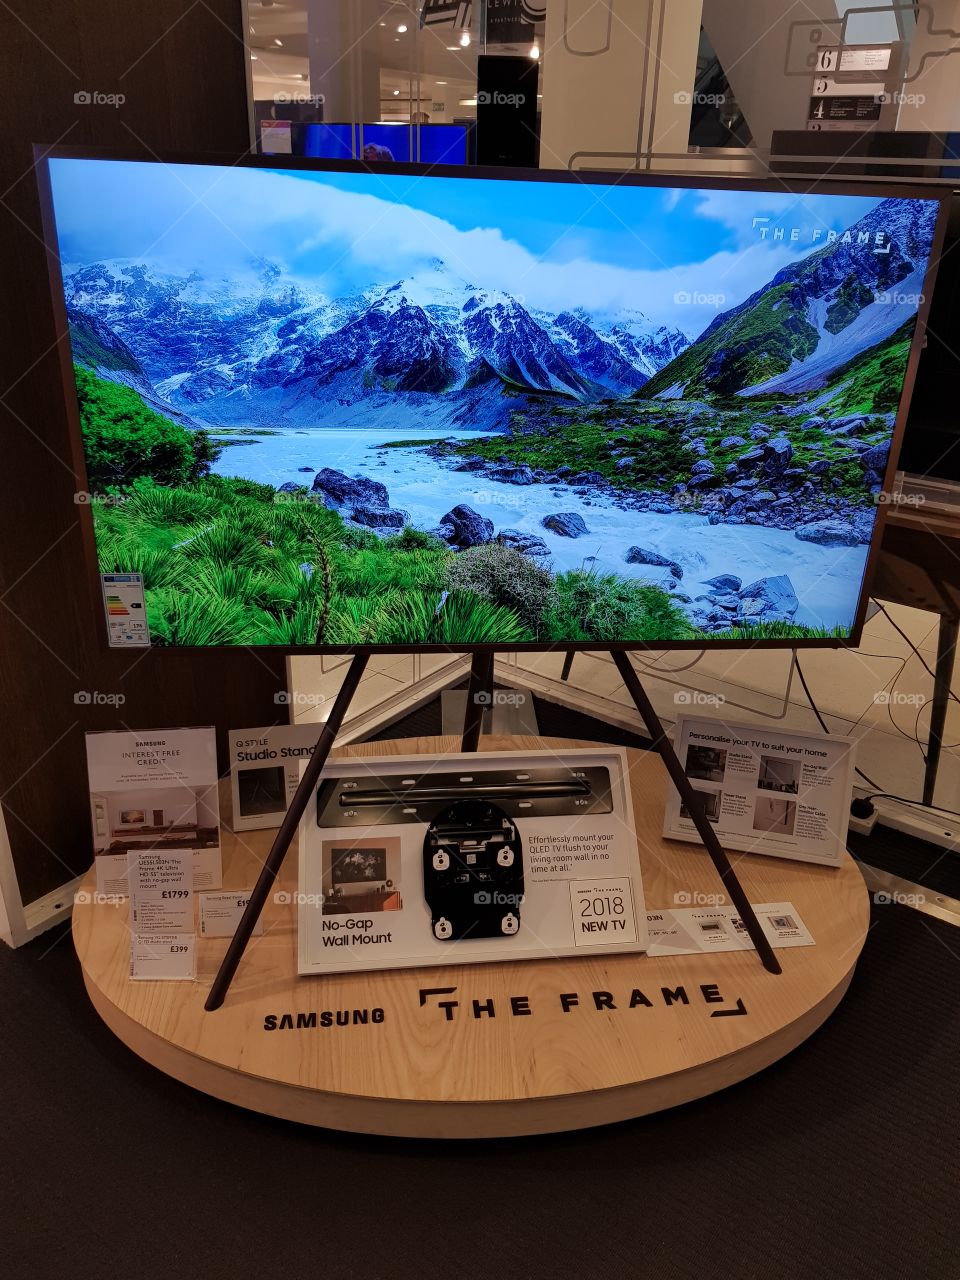 Samsung The Frame art mode 4K UHD TV installation at Peter Jones Sloane square Chelsea King's road London displaying customizable copper bezel and studio stand